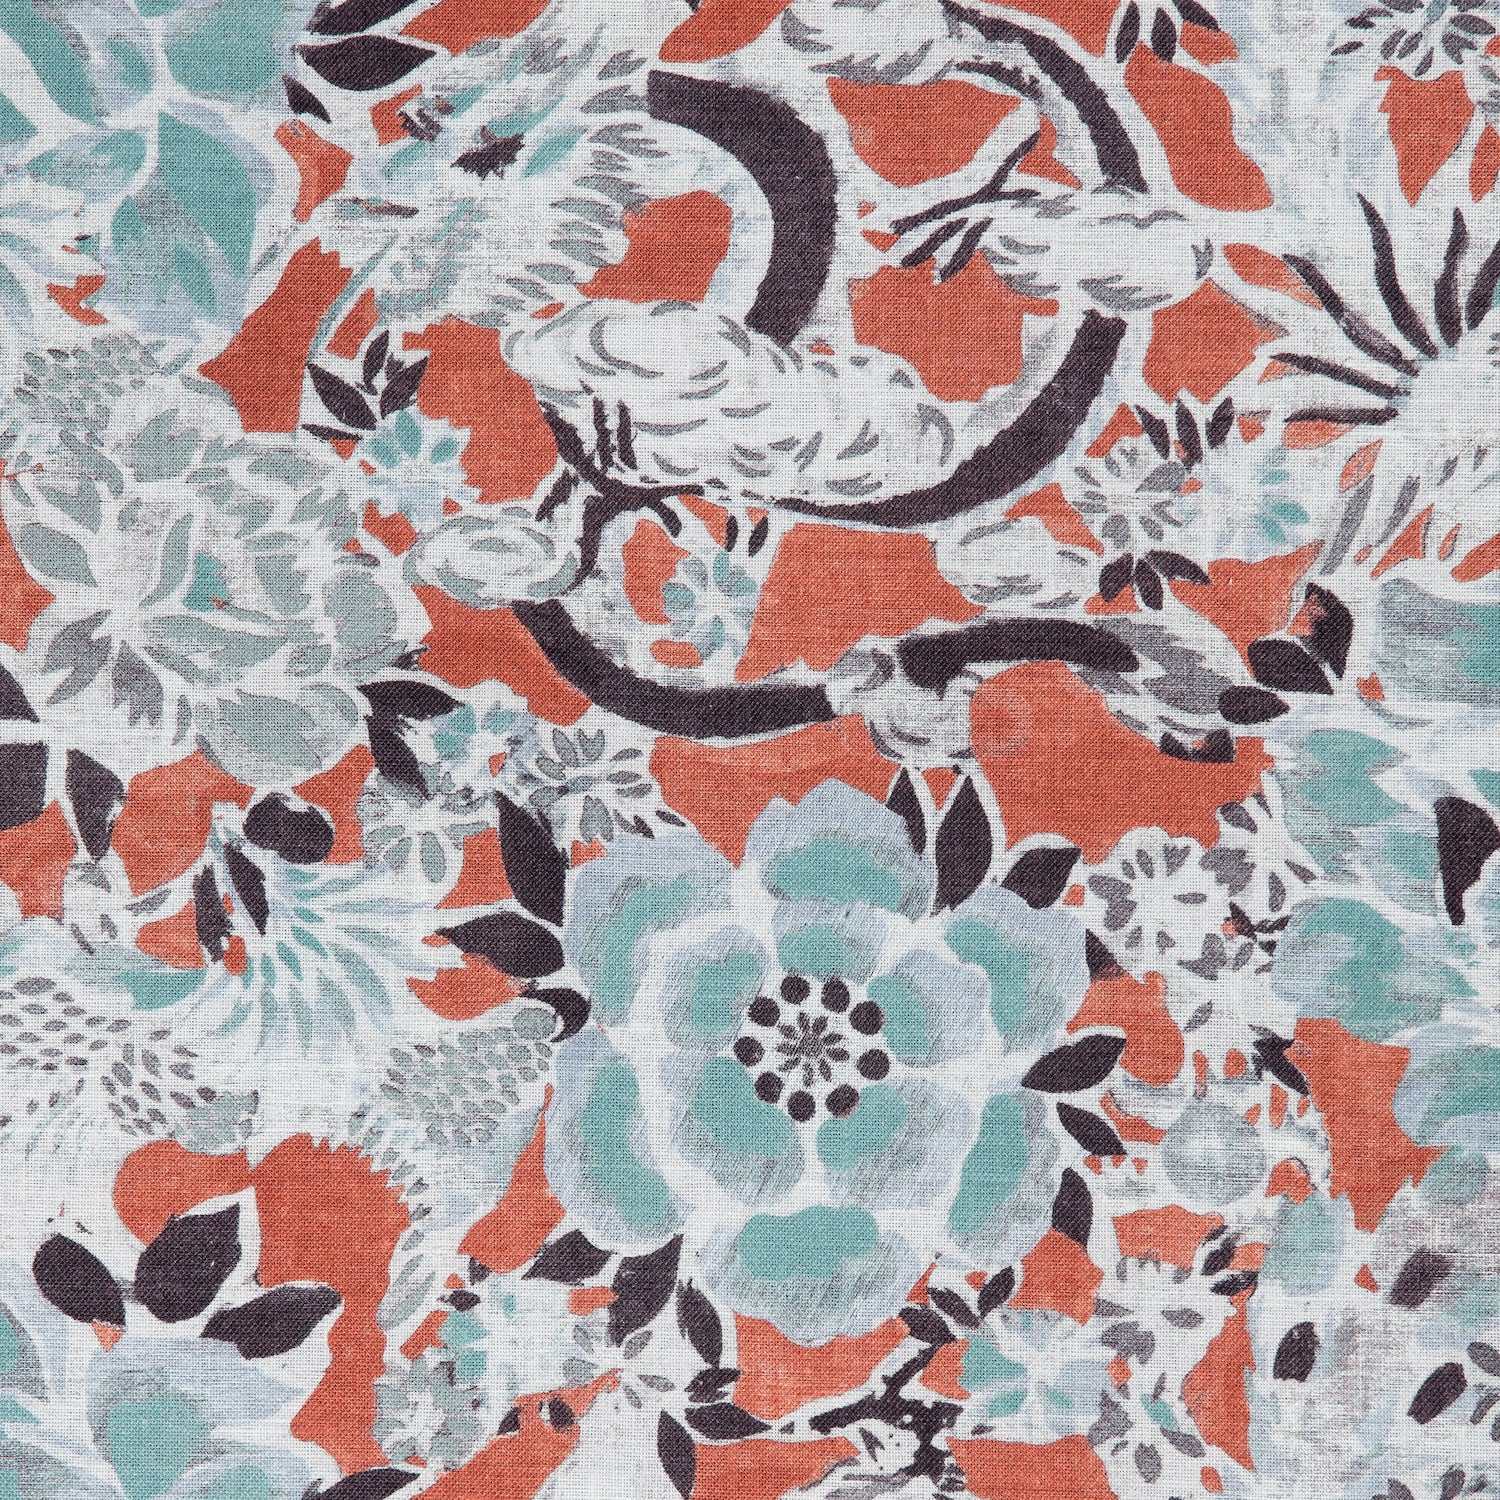 Detail of a linen fabric in a painterly floral pattern in shades of blue and gray on a rust field.